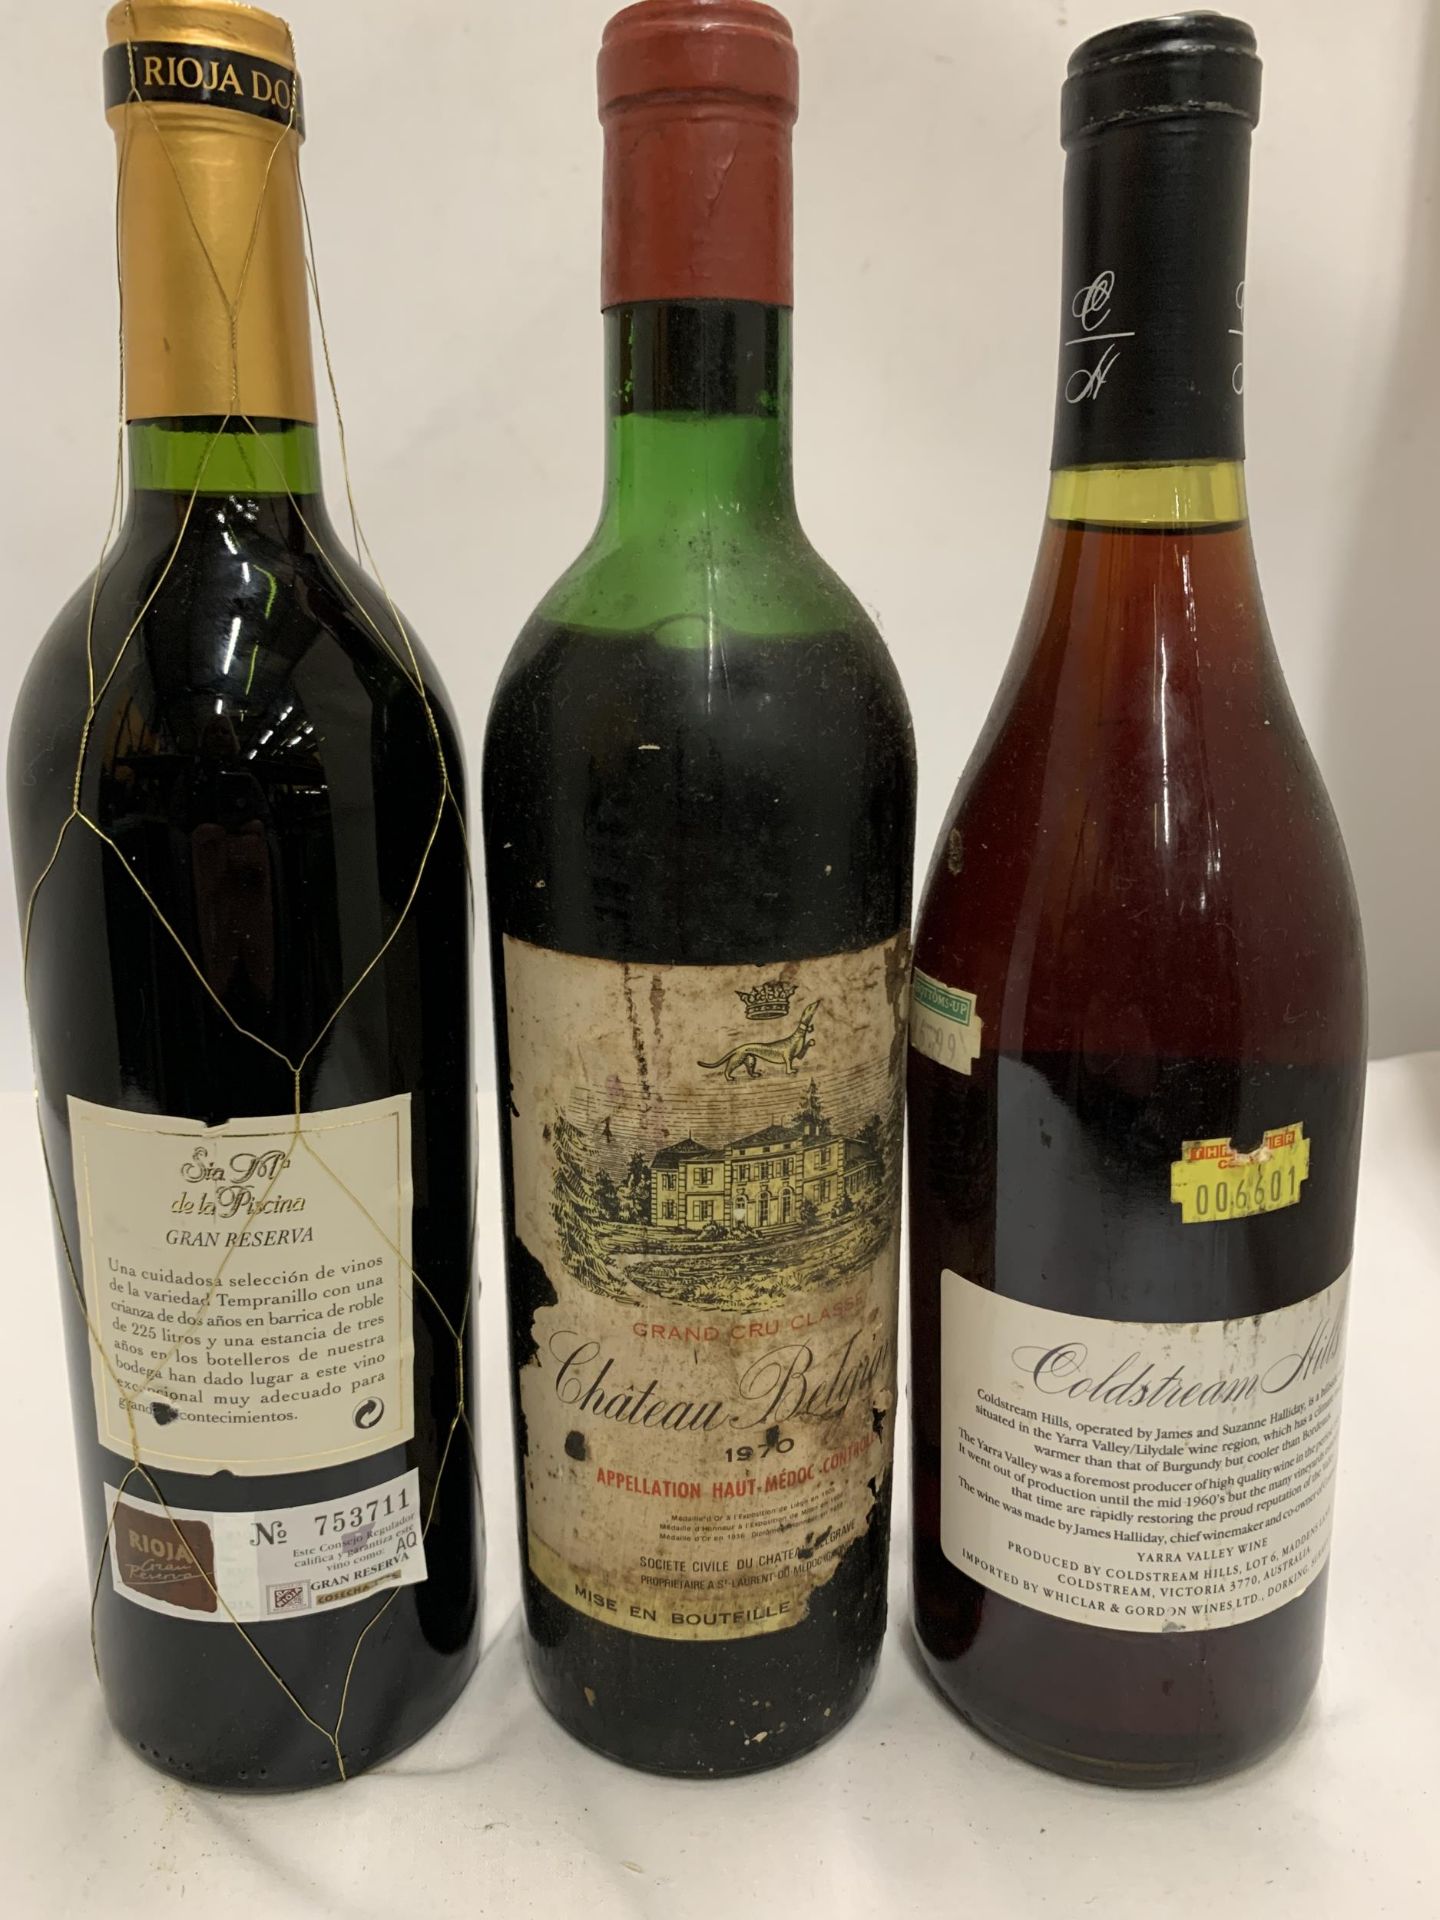 THREE 75CL BOTTLES - 1996 GRAN RESERVA RIOJA, 1970 CHATEAU BELGIOR AND COLDSTREAM HILLS PINOT NOIR - Image 2 of 5